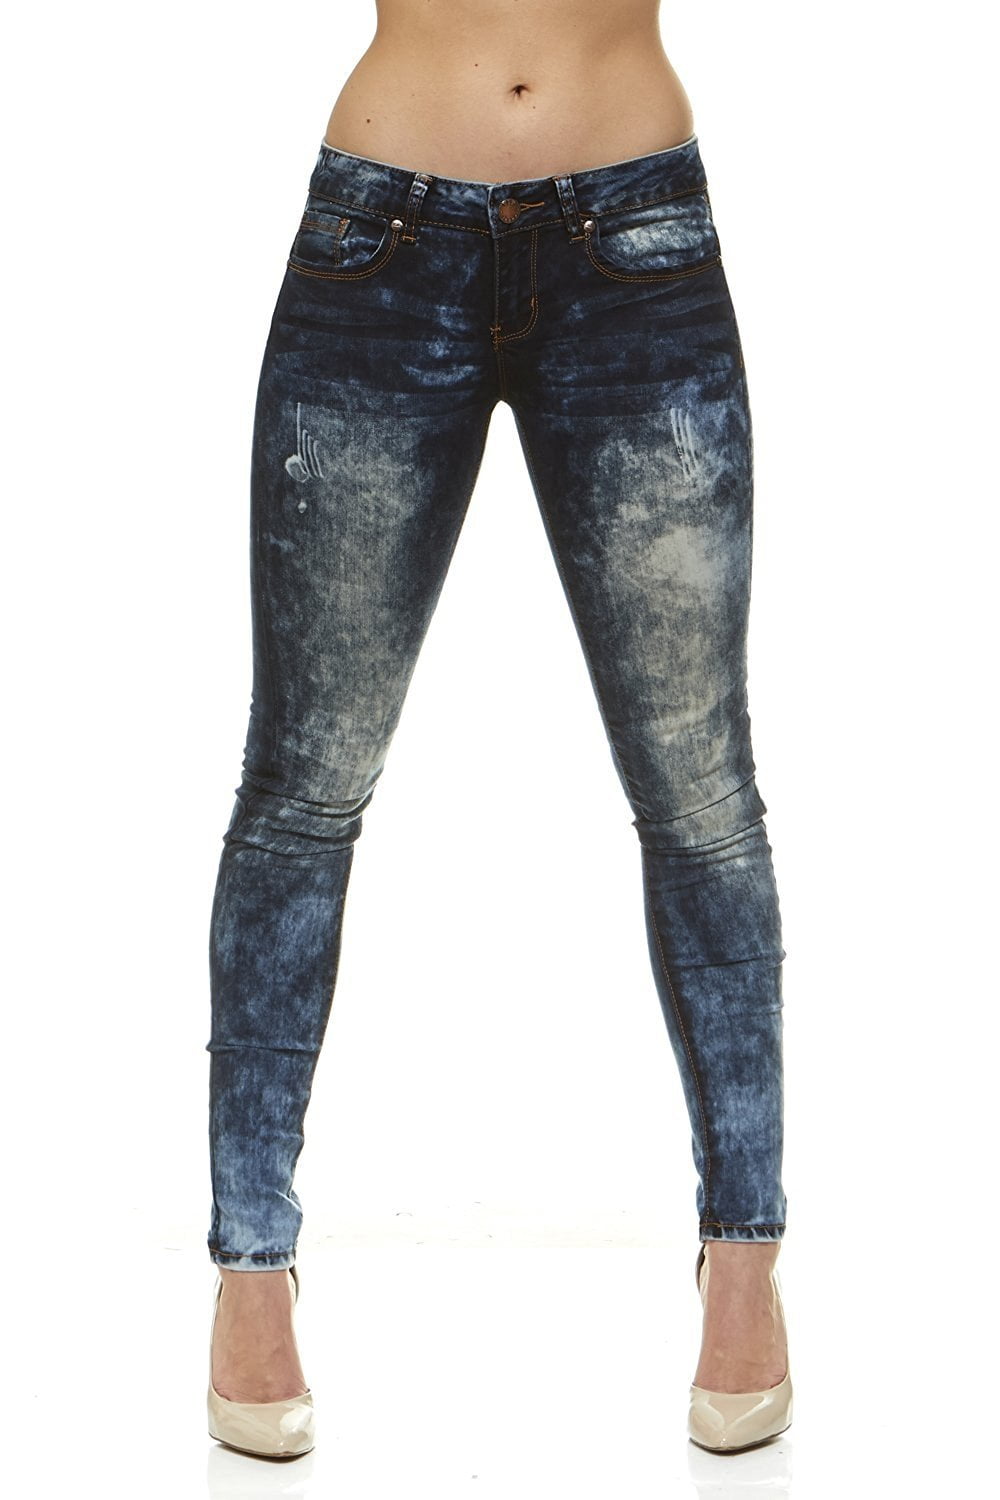 Stretch Skinny Jeans Women Sizes for Slim Jeans Juniors Washed Classic 7 Fit Electric Stone Blue